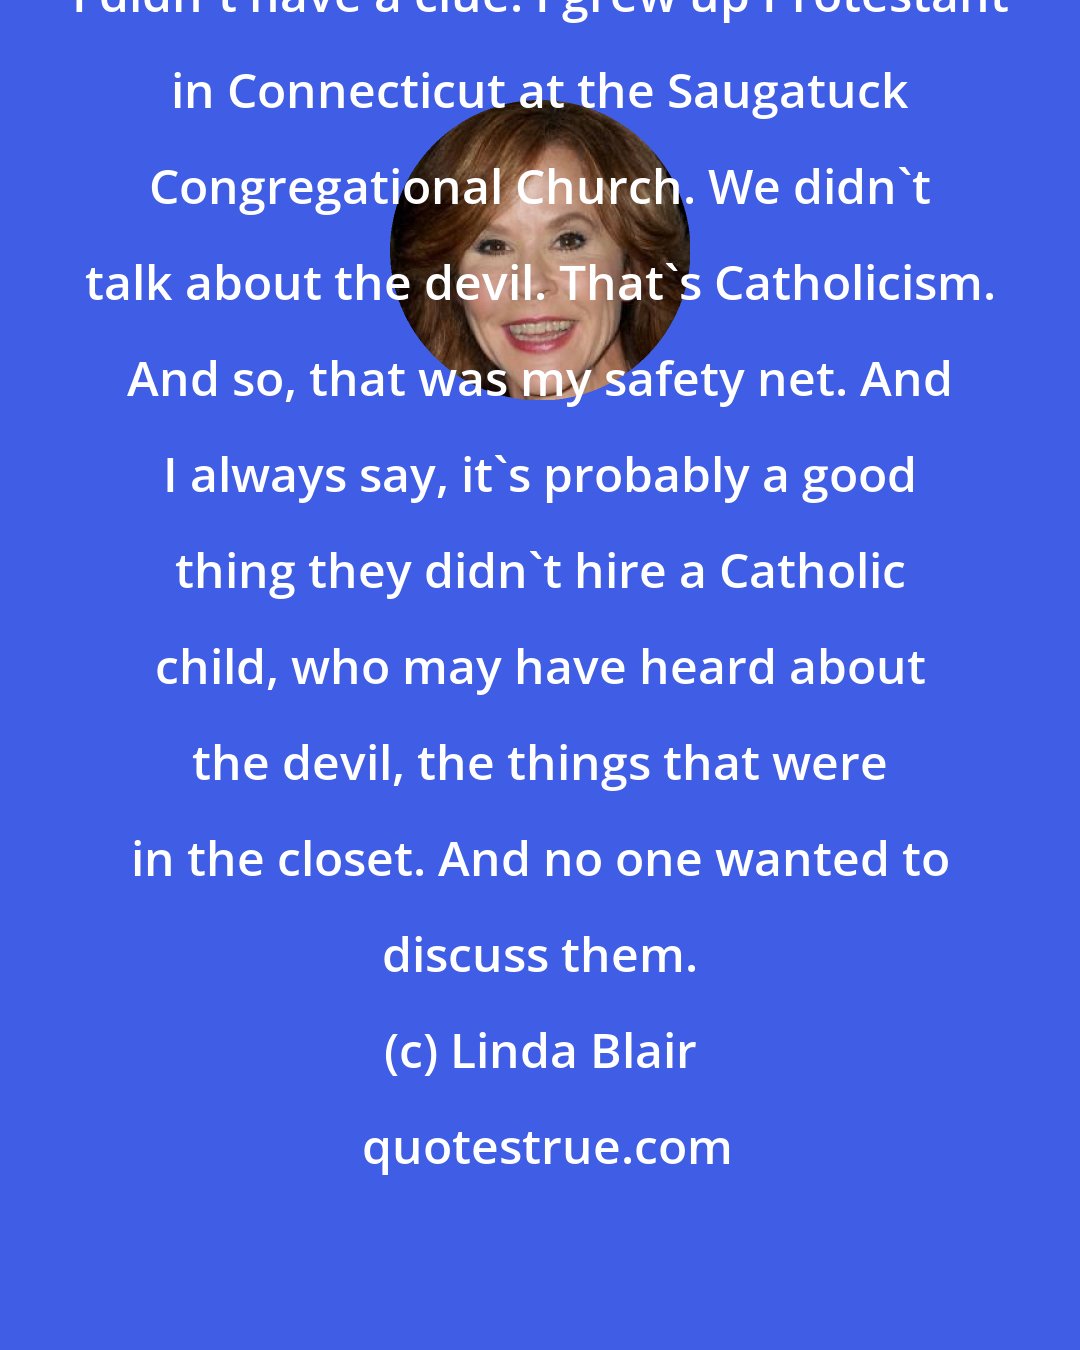 Linda Blair: I didn't have a clue. I grew up Protestant in Connecticut at the Saugatuck Congregational Church. We didn't talk about the devil. That's Catholicism. And so, that was my safety net. And I always say, it's probably a good thing they didn't hire a Catholic child, who may have heard about the devil, the things that were in the closet. And no one wanted to discuss them.